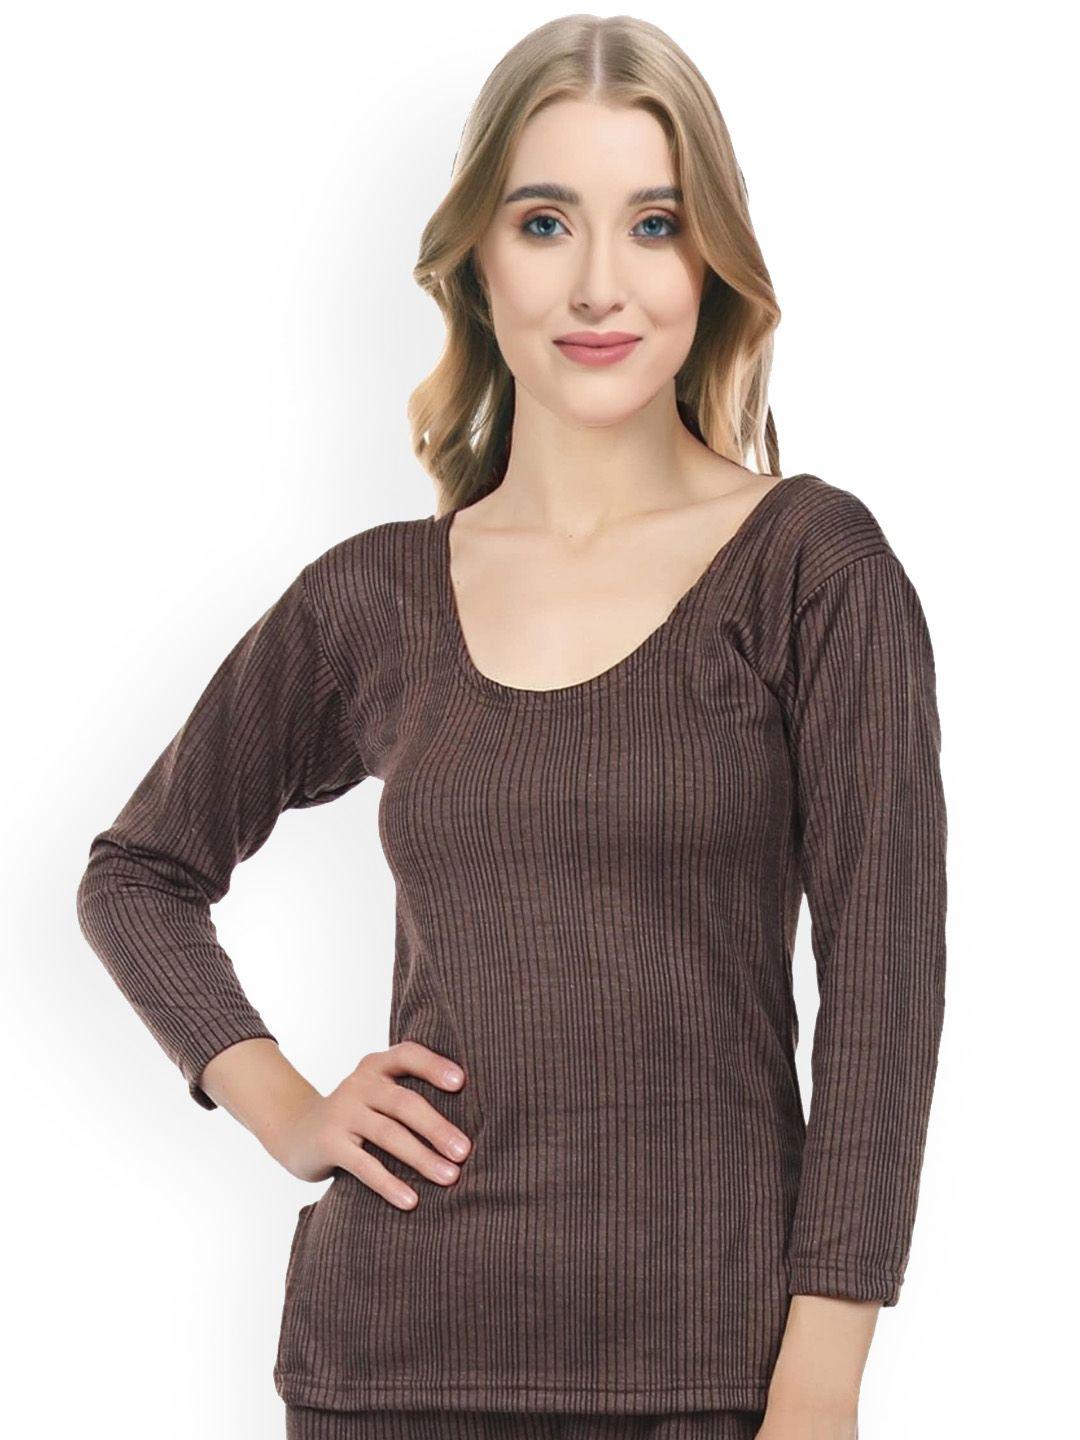 funahme ribbed round neck thermal top